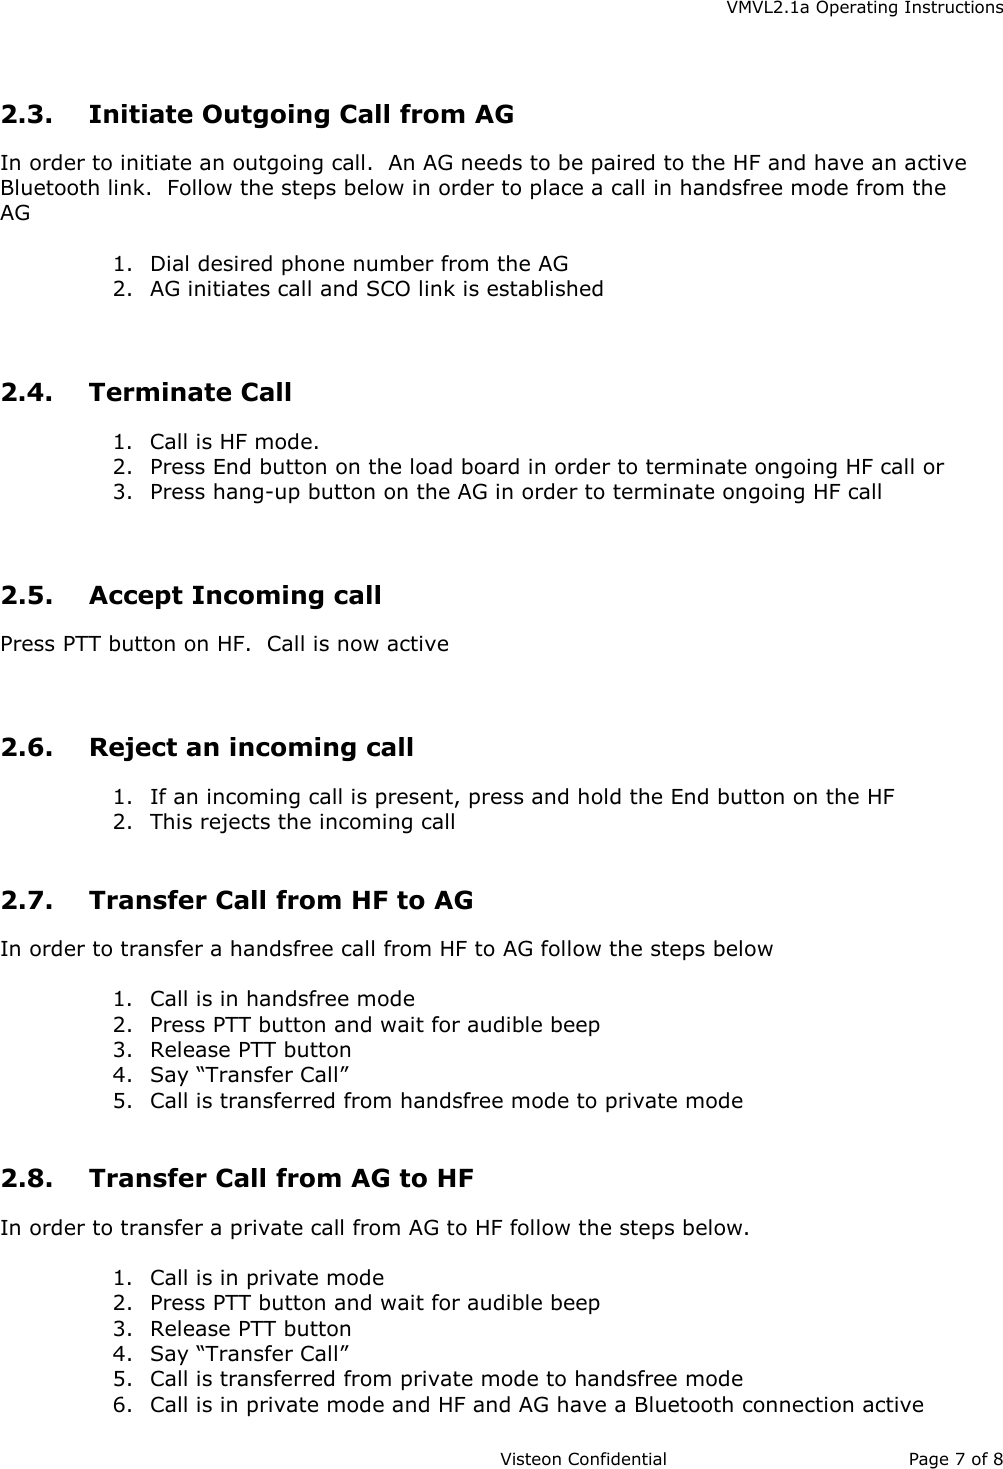    VMVL2.1a Operating Instructions                     Visteon Confidential Page 7 of 8   2.3.  Initiate Outgoing Call from AG In order to initiate an outgoing call.  An AG needs to be paired to the HF and have an active Bluetooth link.  Follow the steps below in order to place a call in handsfree mode from the AG  1.  Dial desired phone number from the AG 2.  AG initiates call and SCO link is established   2.4. Terminate Call 1.  Call is HF mode.   2.  Press End button on the load board in order to terminate ongoing HF call or 3.  Press hang-up button on the AG in order to terminate ongoing HF call   2.5. Accept Incoming call Press PTT button on HF.  Call is now active   2.6.  Reject an incoming call 1.  If an incoming call is present, press and hold the End button on the HF 2.  This rejects the incoming call  2.7.  Transfer Call from HF to AG In order to transfer a handsfree call from HF to AG follow the steps below  1.  Call is in handsfree mode 2.  Press PTT button and wait for audible beep 3.  Release PTT button 4.  Say “Transfer Call” 5.  Call is transferred from handsfree mode to private mode  2.8.  Transfer Call from AG to HF In order to transfer a private call from AG to HF follow the steps below.   1.  Call is in private mode 2.  Press PTT button and wait for audible beep 3.  Release PTT button 4.  Say “Transfer Call” 5.  Call is transferred from private mode to handsfree mode 6.  Call is in private mode and HF and AG have a Bluetooth connection active 